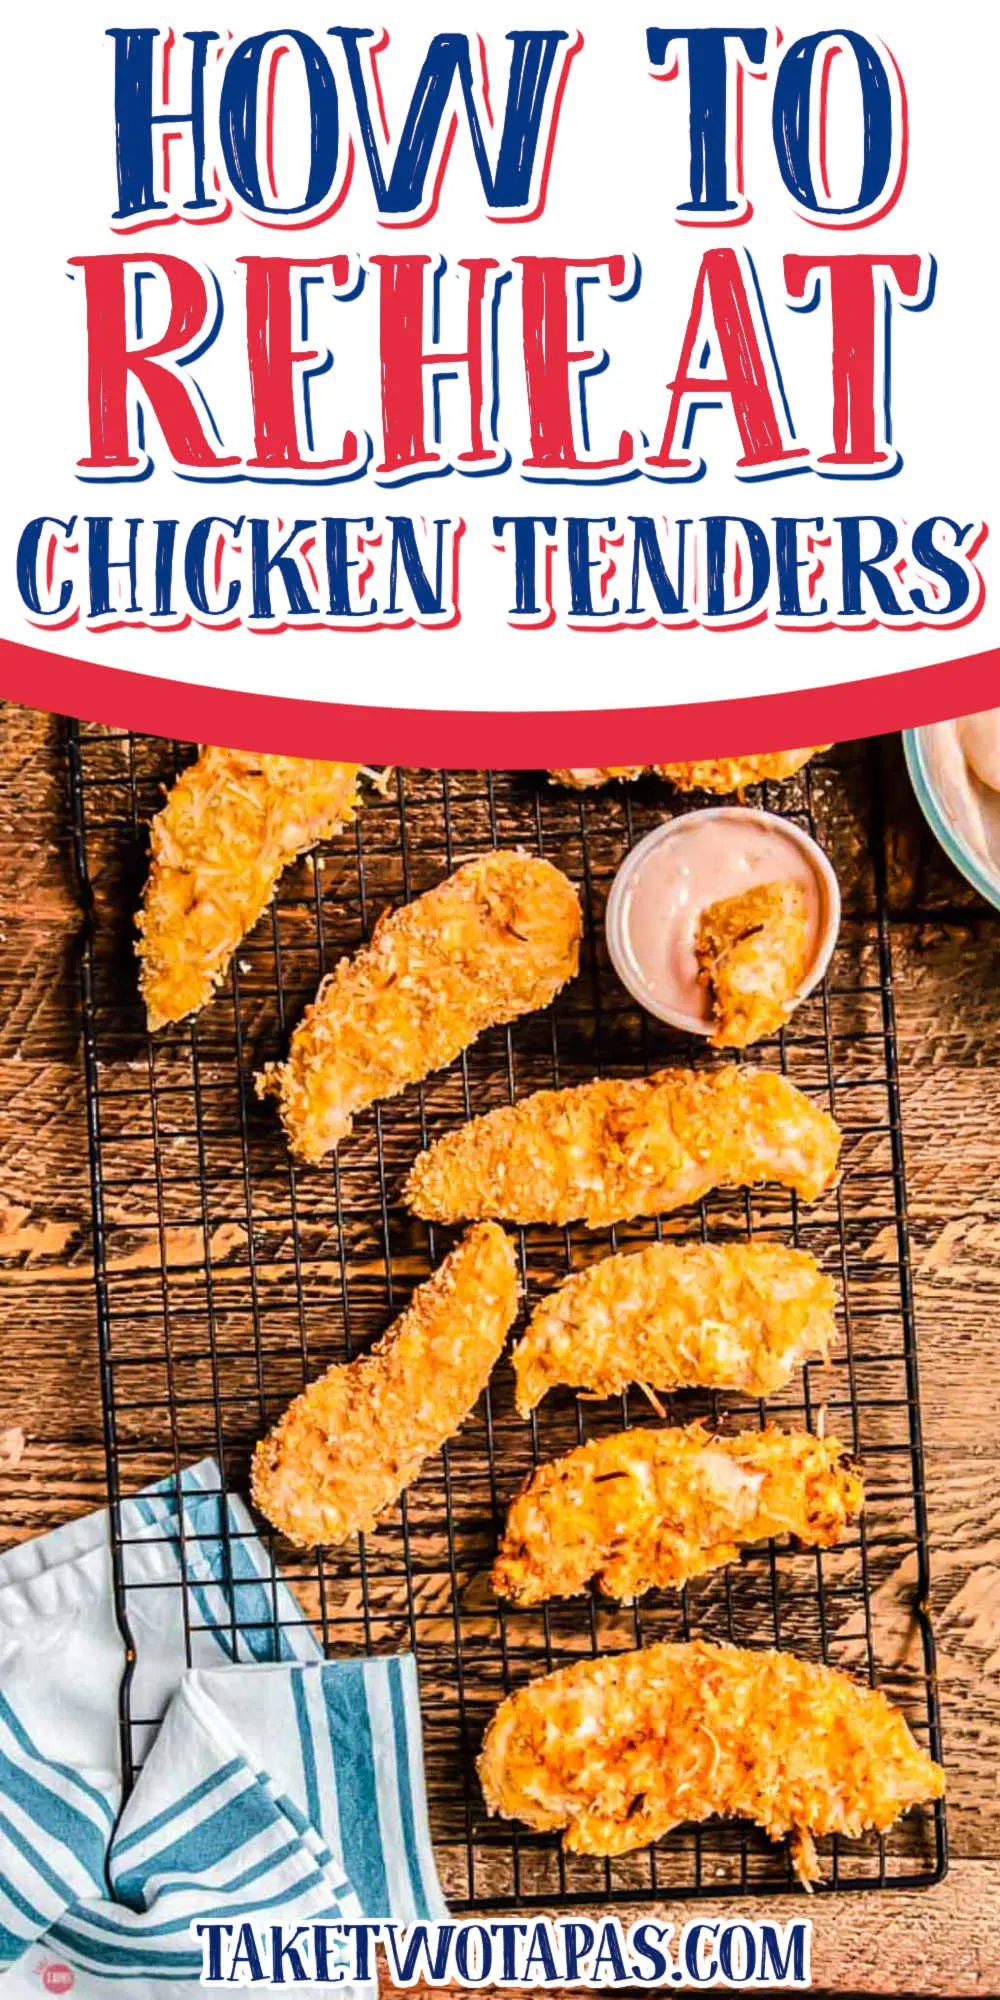 chicken strips with red text " how to reheat chicken tenders" and a white banner